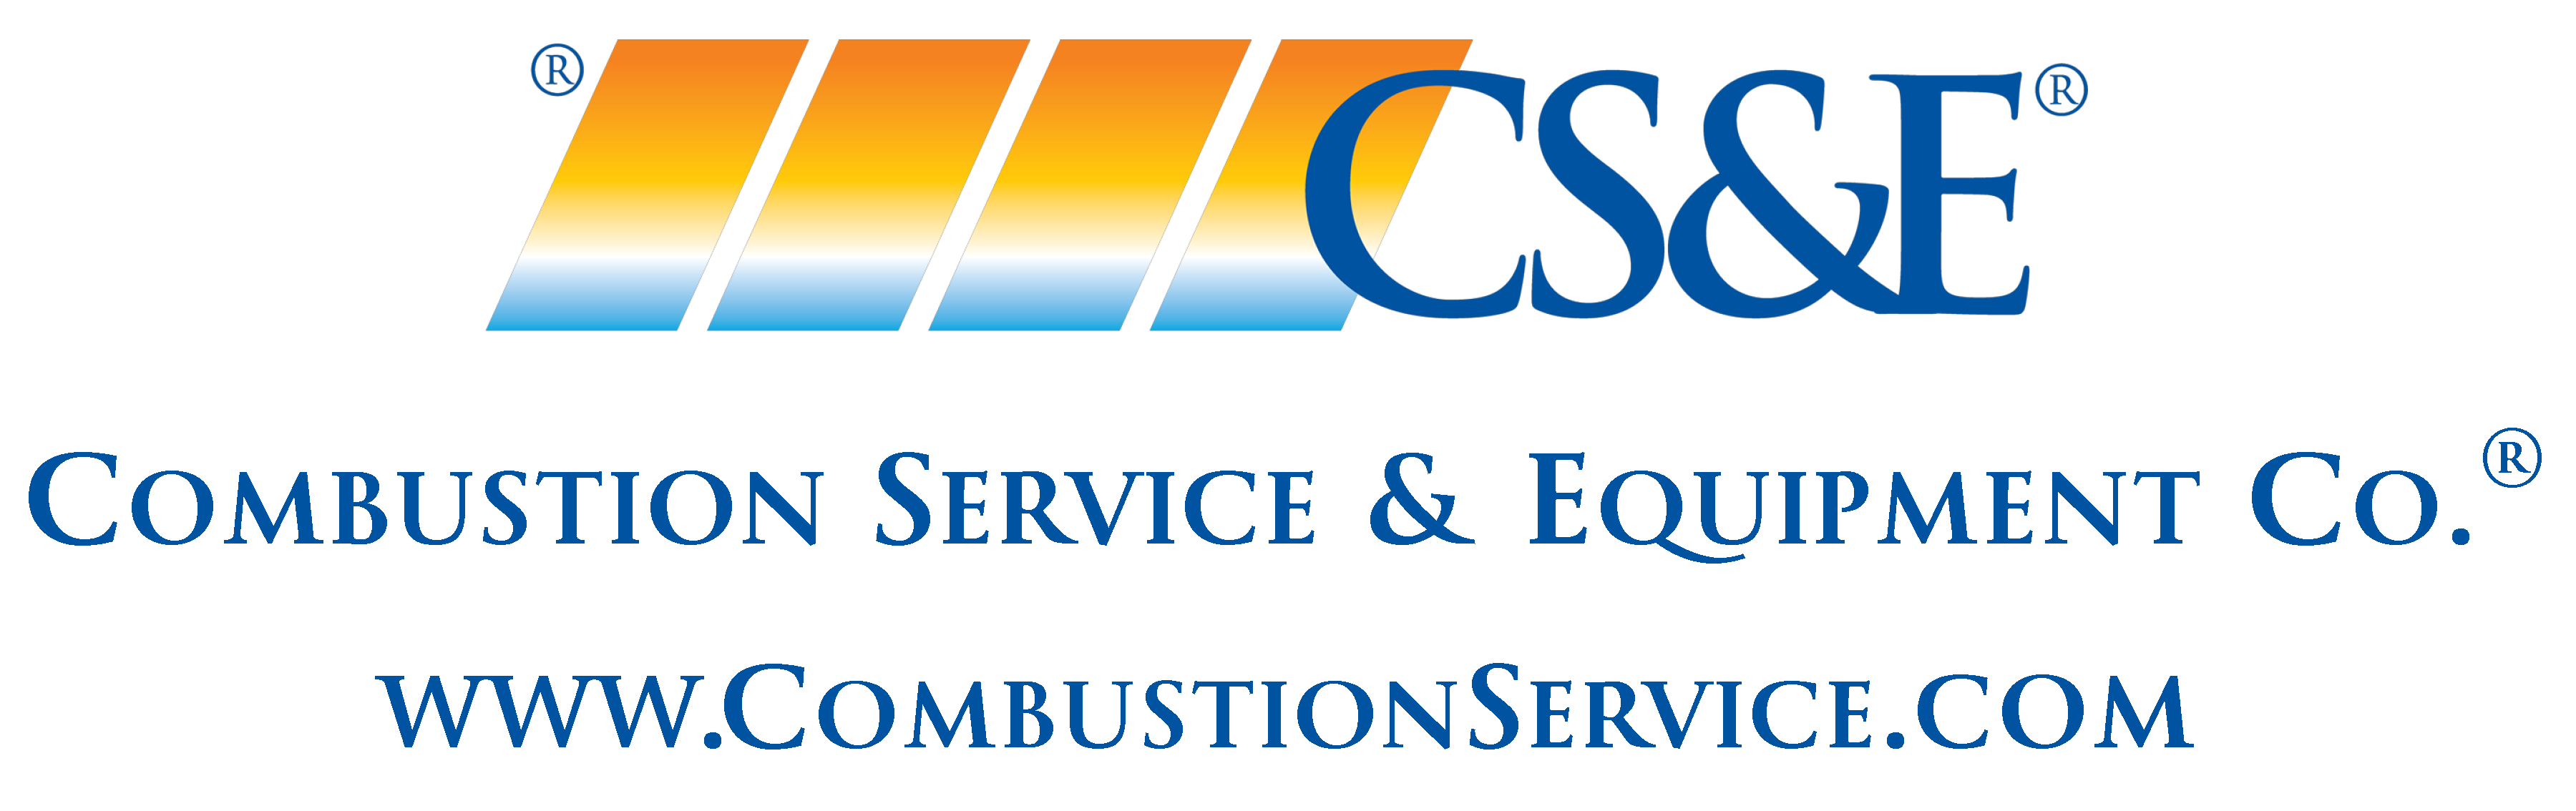 Combustion Service & Equipment Co.